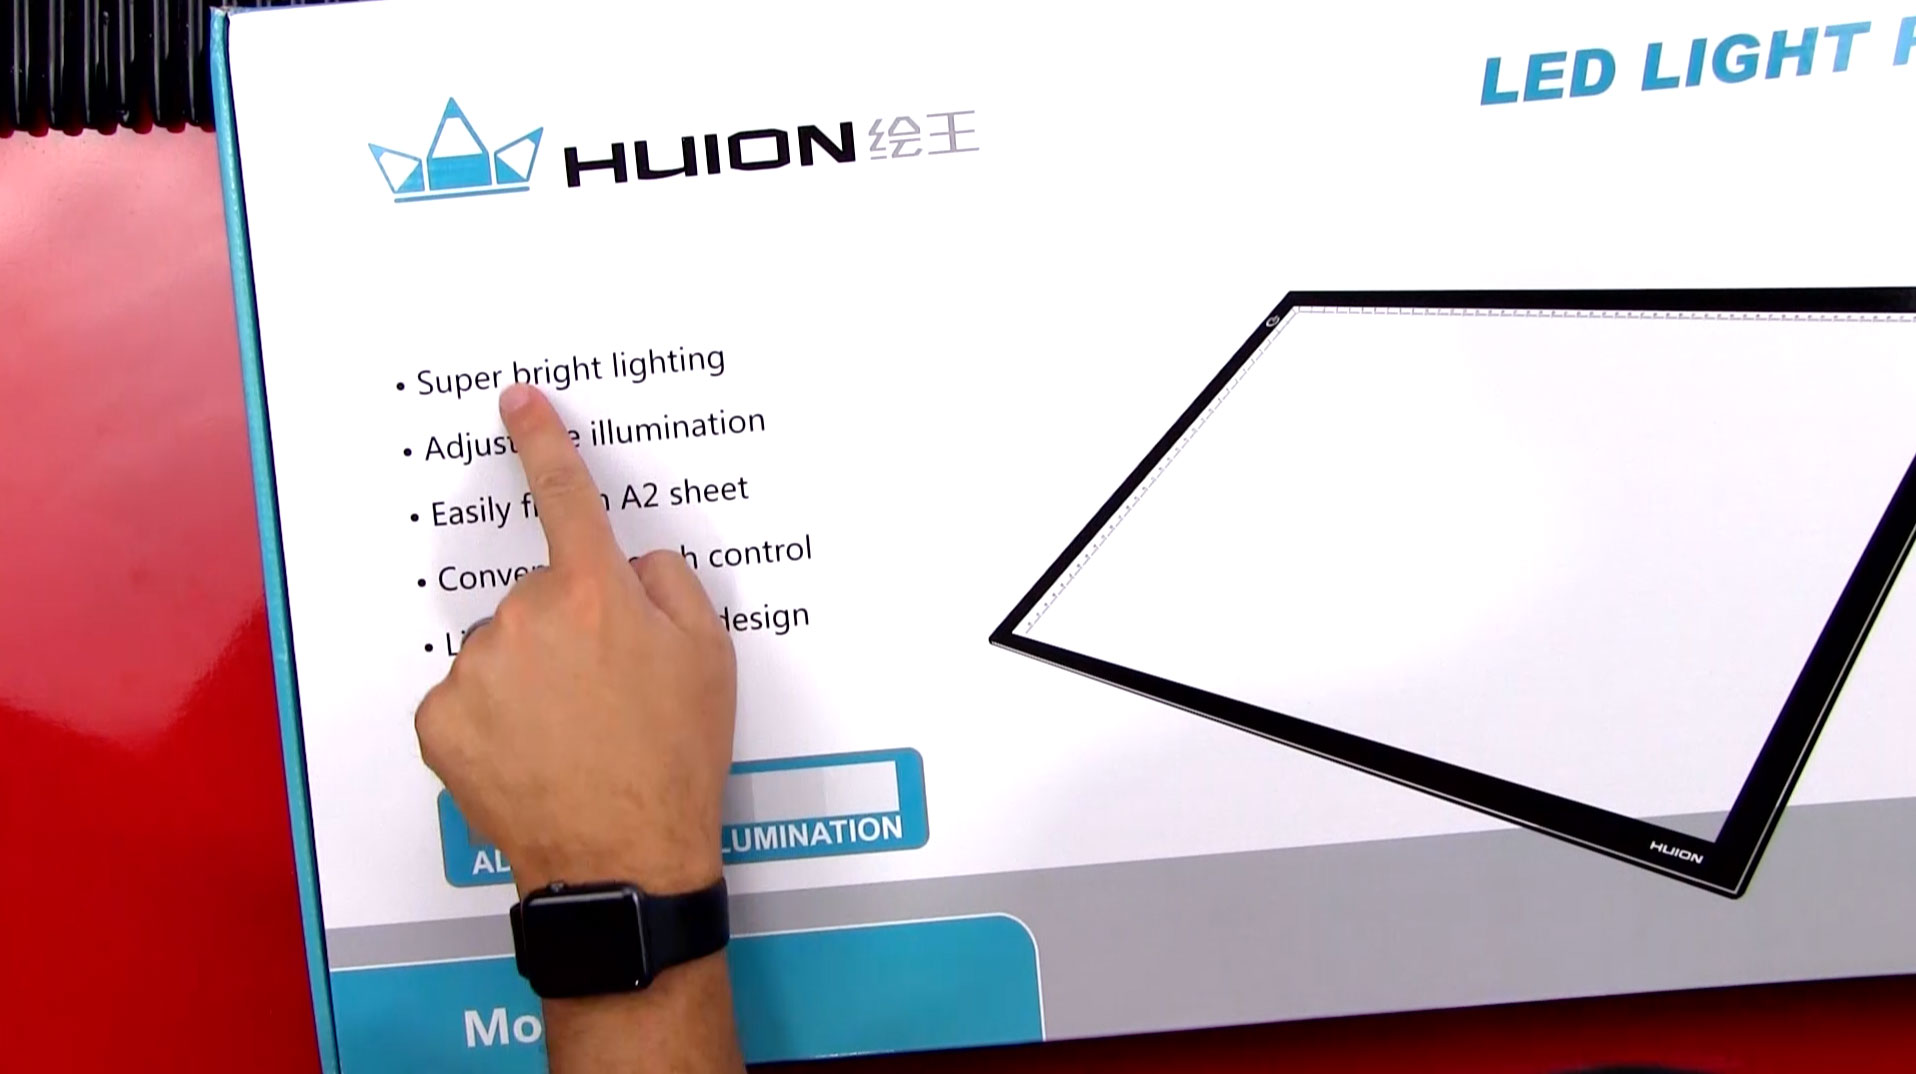 Unboxed Review - Huion A2 LED Light Pad - Art For Kids Hub 